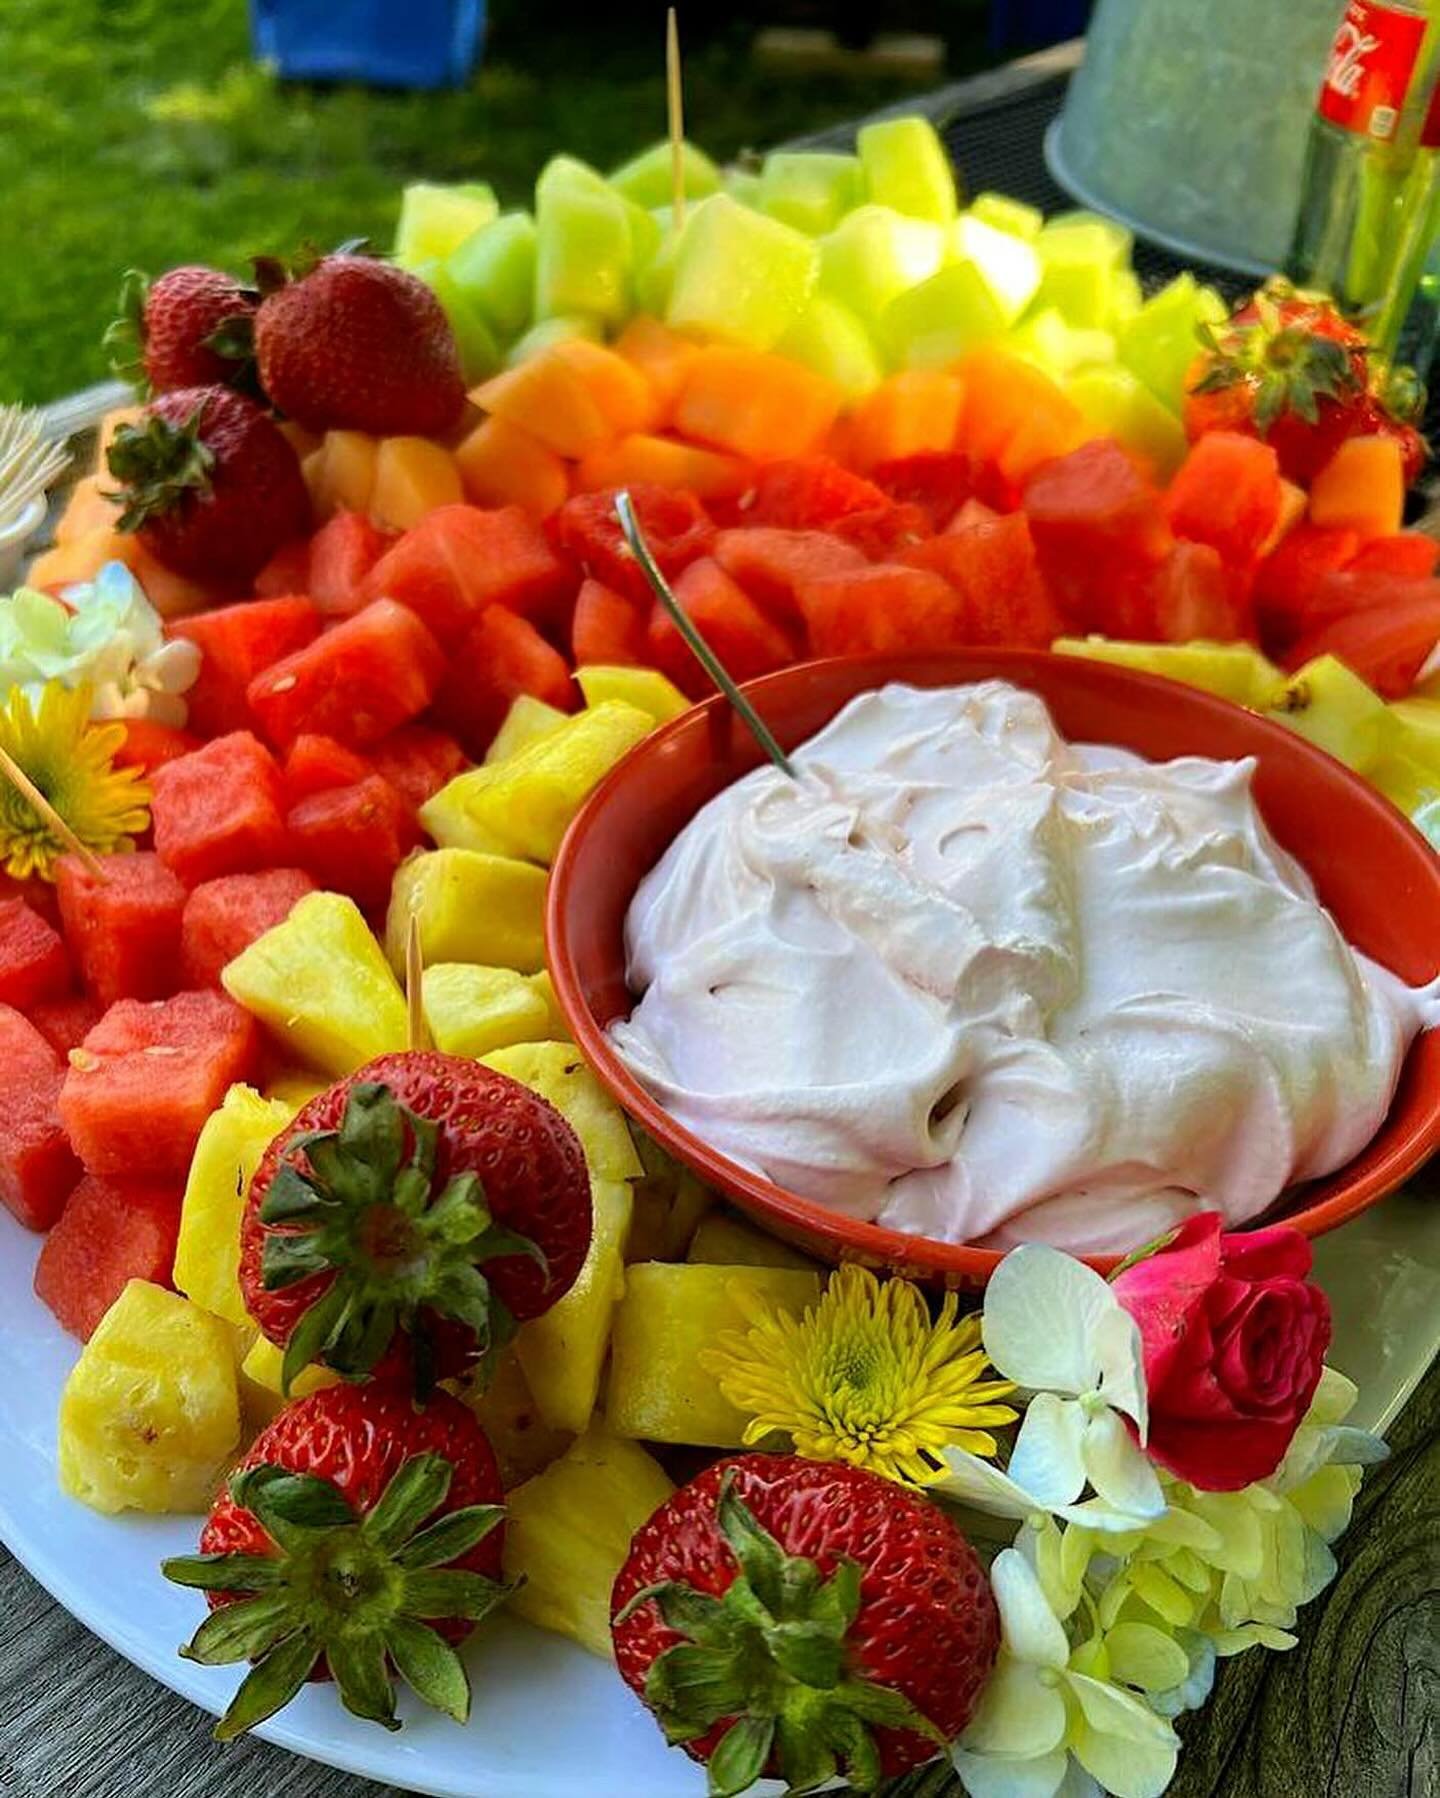 Eating healthy at events has never been easier and more delicious. 🍉🍈🍇🍓

Juicy watermelon slices are included with every booking! Choose from the assorted fruit platter, cheese platter and more.

#maine #portlandmaineweddings #mainewedding #maine